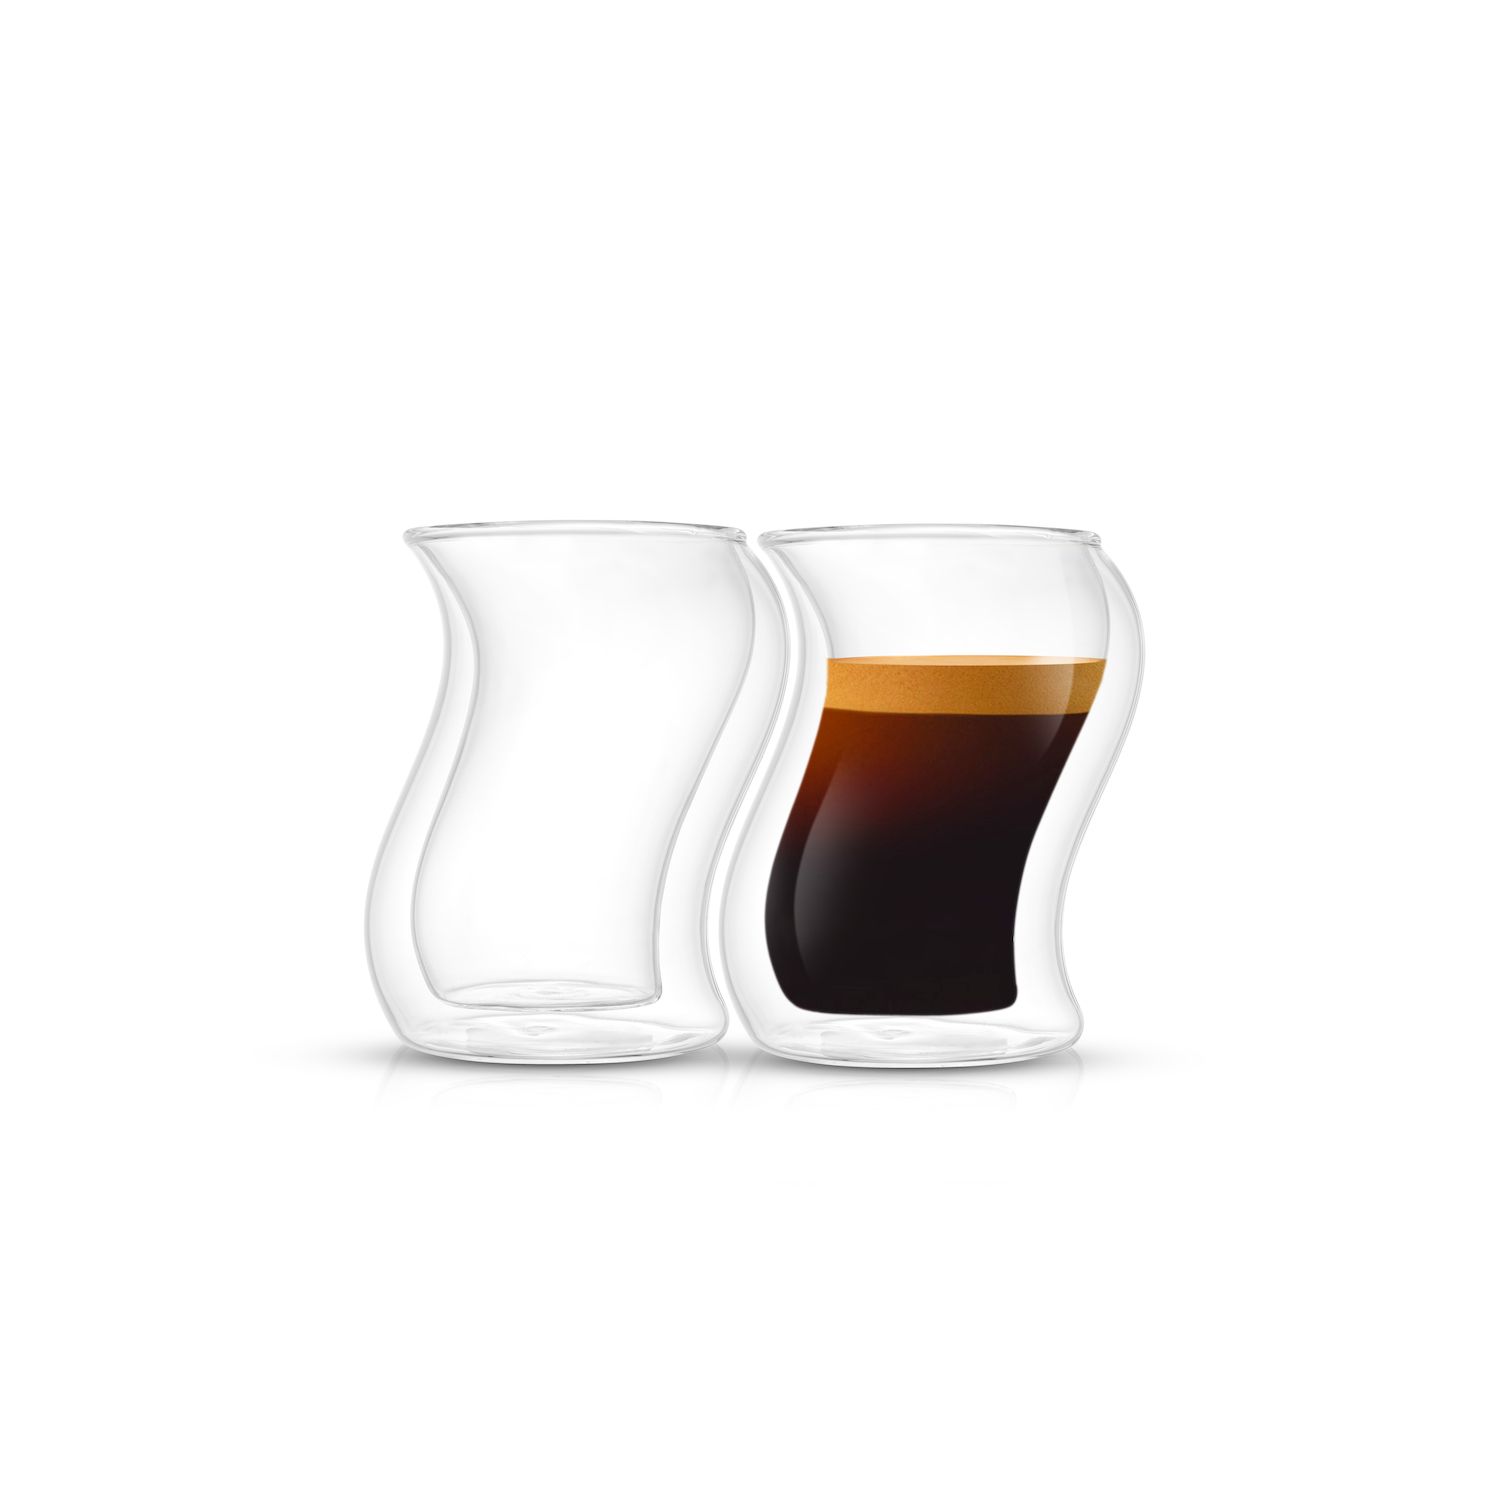 JoyJolt Stoiva Stackable Double Wall Insulated Espresso Glasses, 5 oz Set of 4, Clear